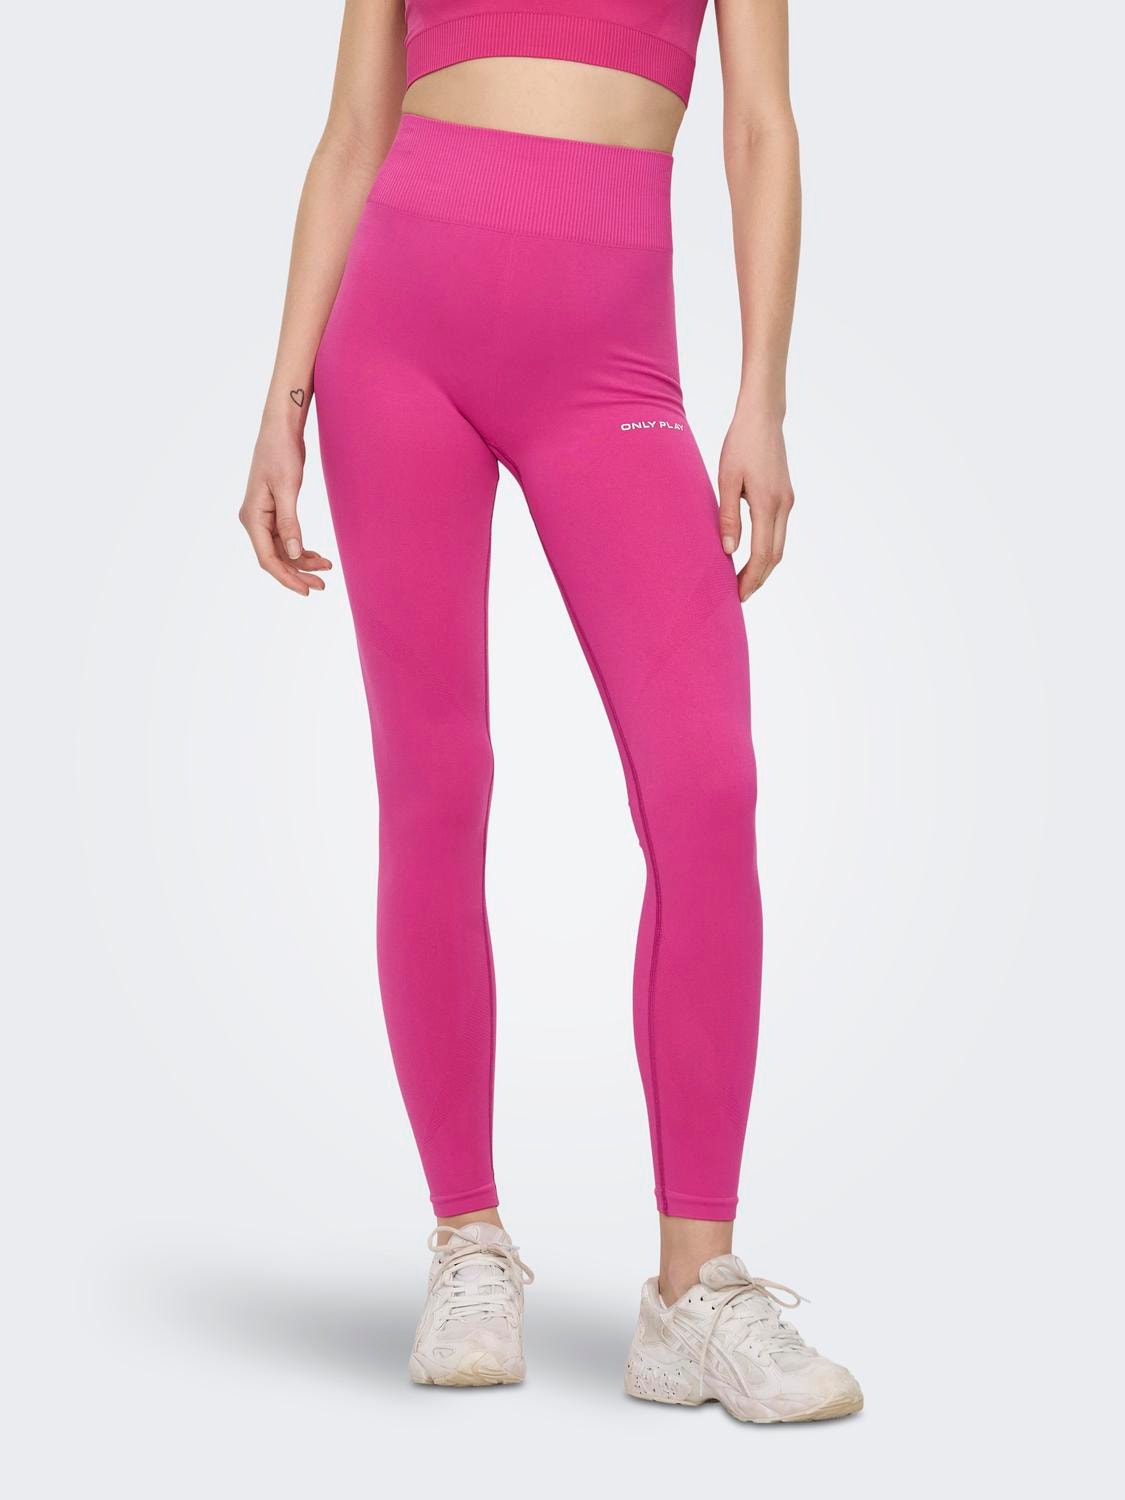 https://images.only.com/15281095/4098152/003/only-tightfithighwaistleggings-rose.jpg?v=b66e6eb7b32397ce845f3c5f7026c8a9&format=webp&width=1280&quality=90&key=25-0-3